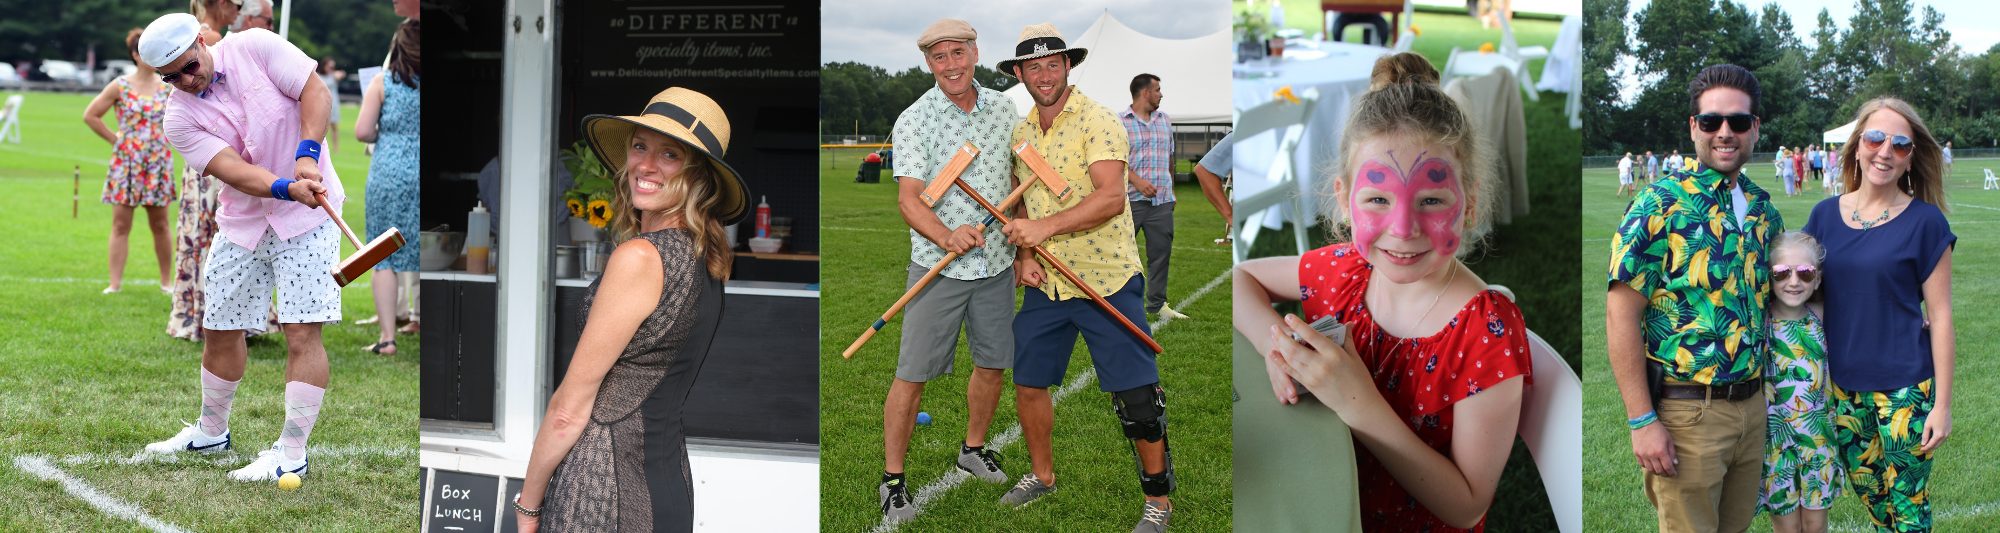 collage of photos from previous Croquet events